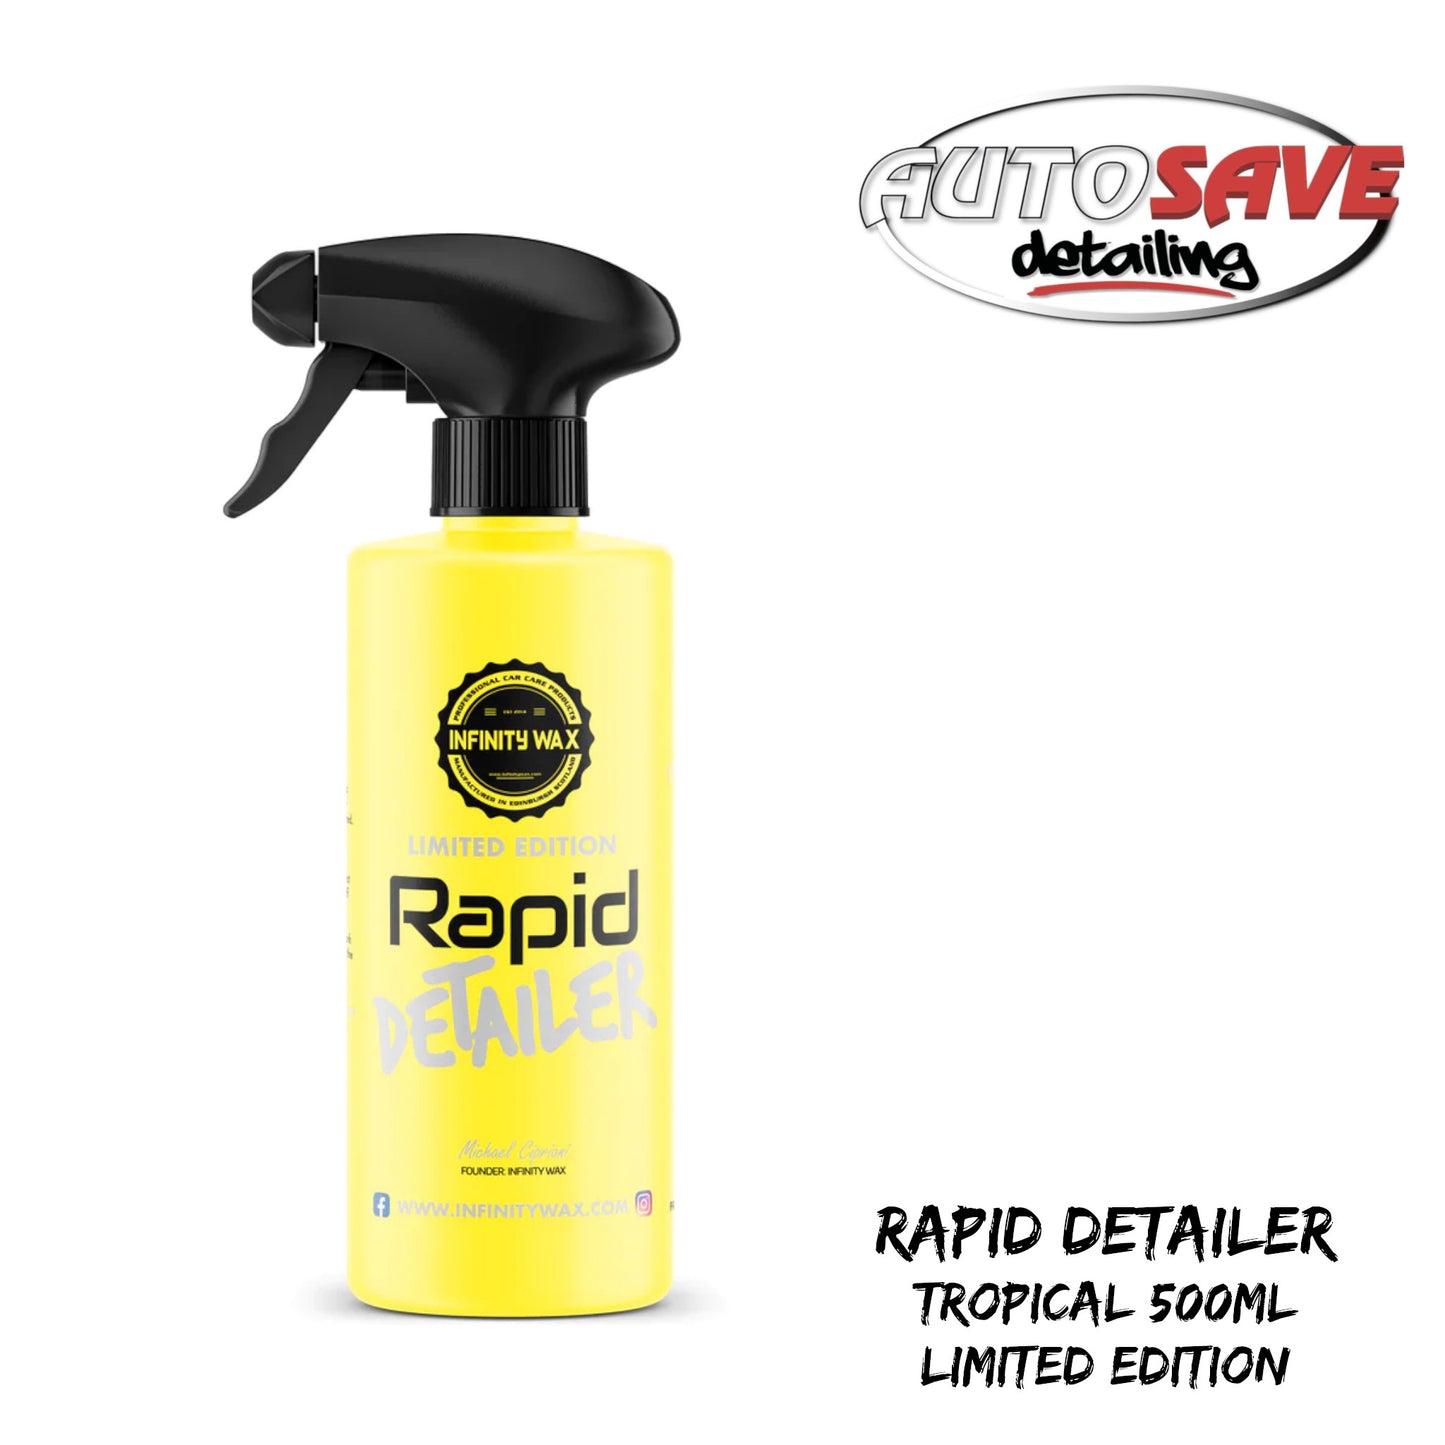 Rapid Detailer Tropical Limited Edition